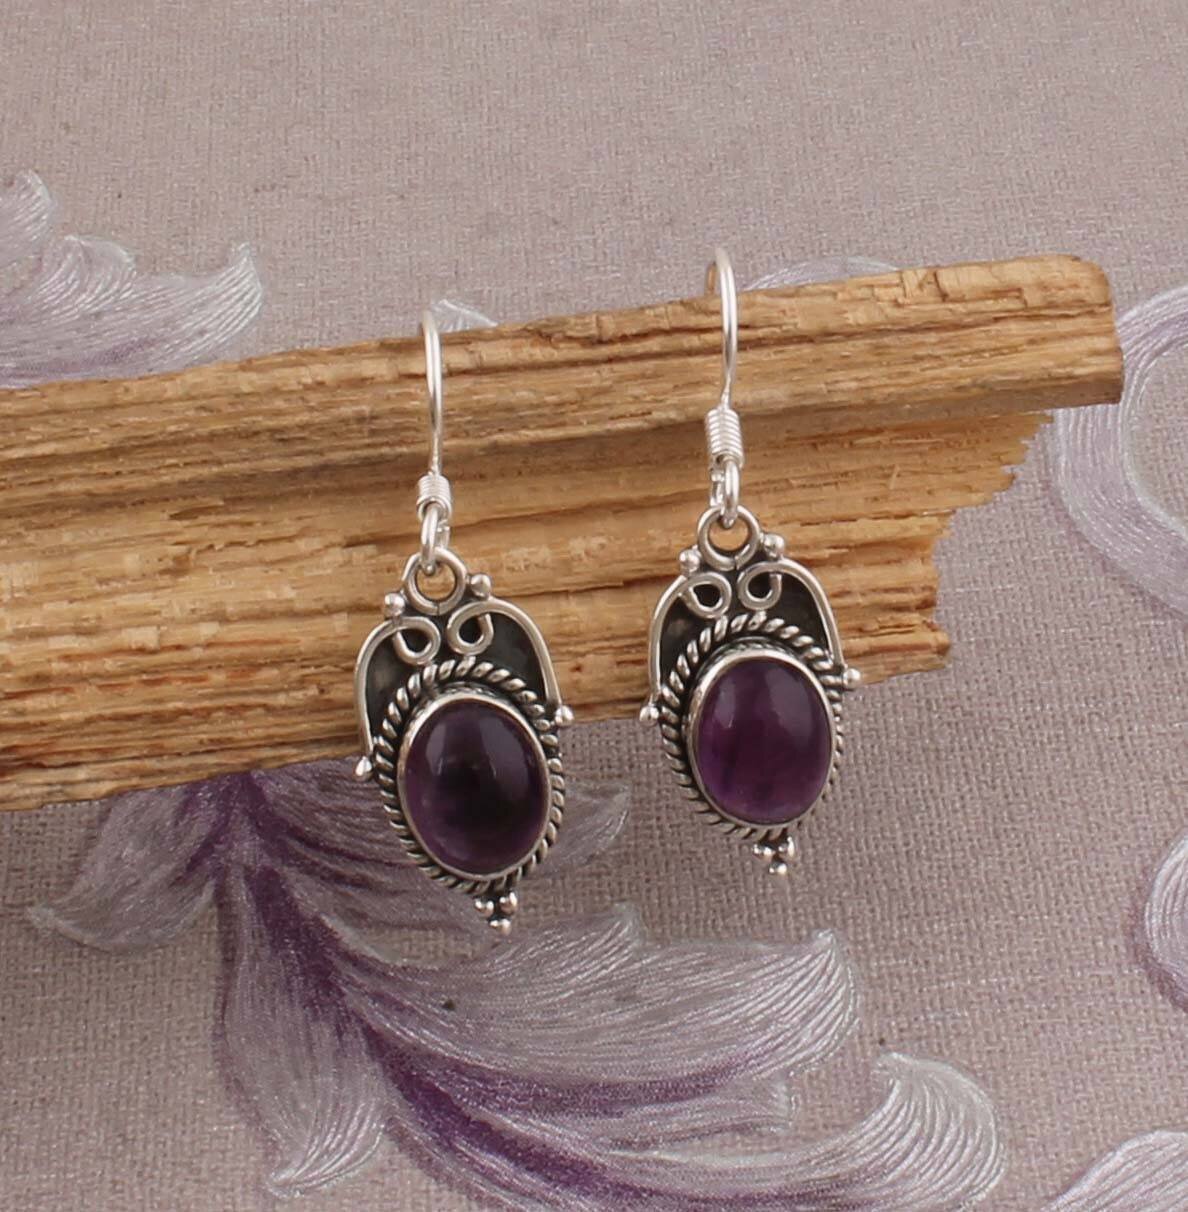 Natural Amethyst AAA+Quality Gemstone Earring,Oval Cabochon Stone Earring 925-Sterling Silver Earring,Antique Silver Earring Gift For Her